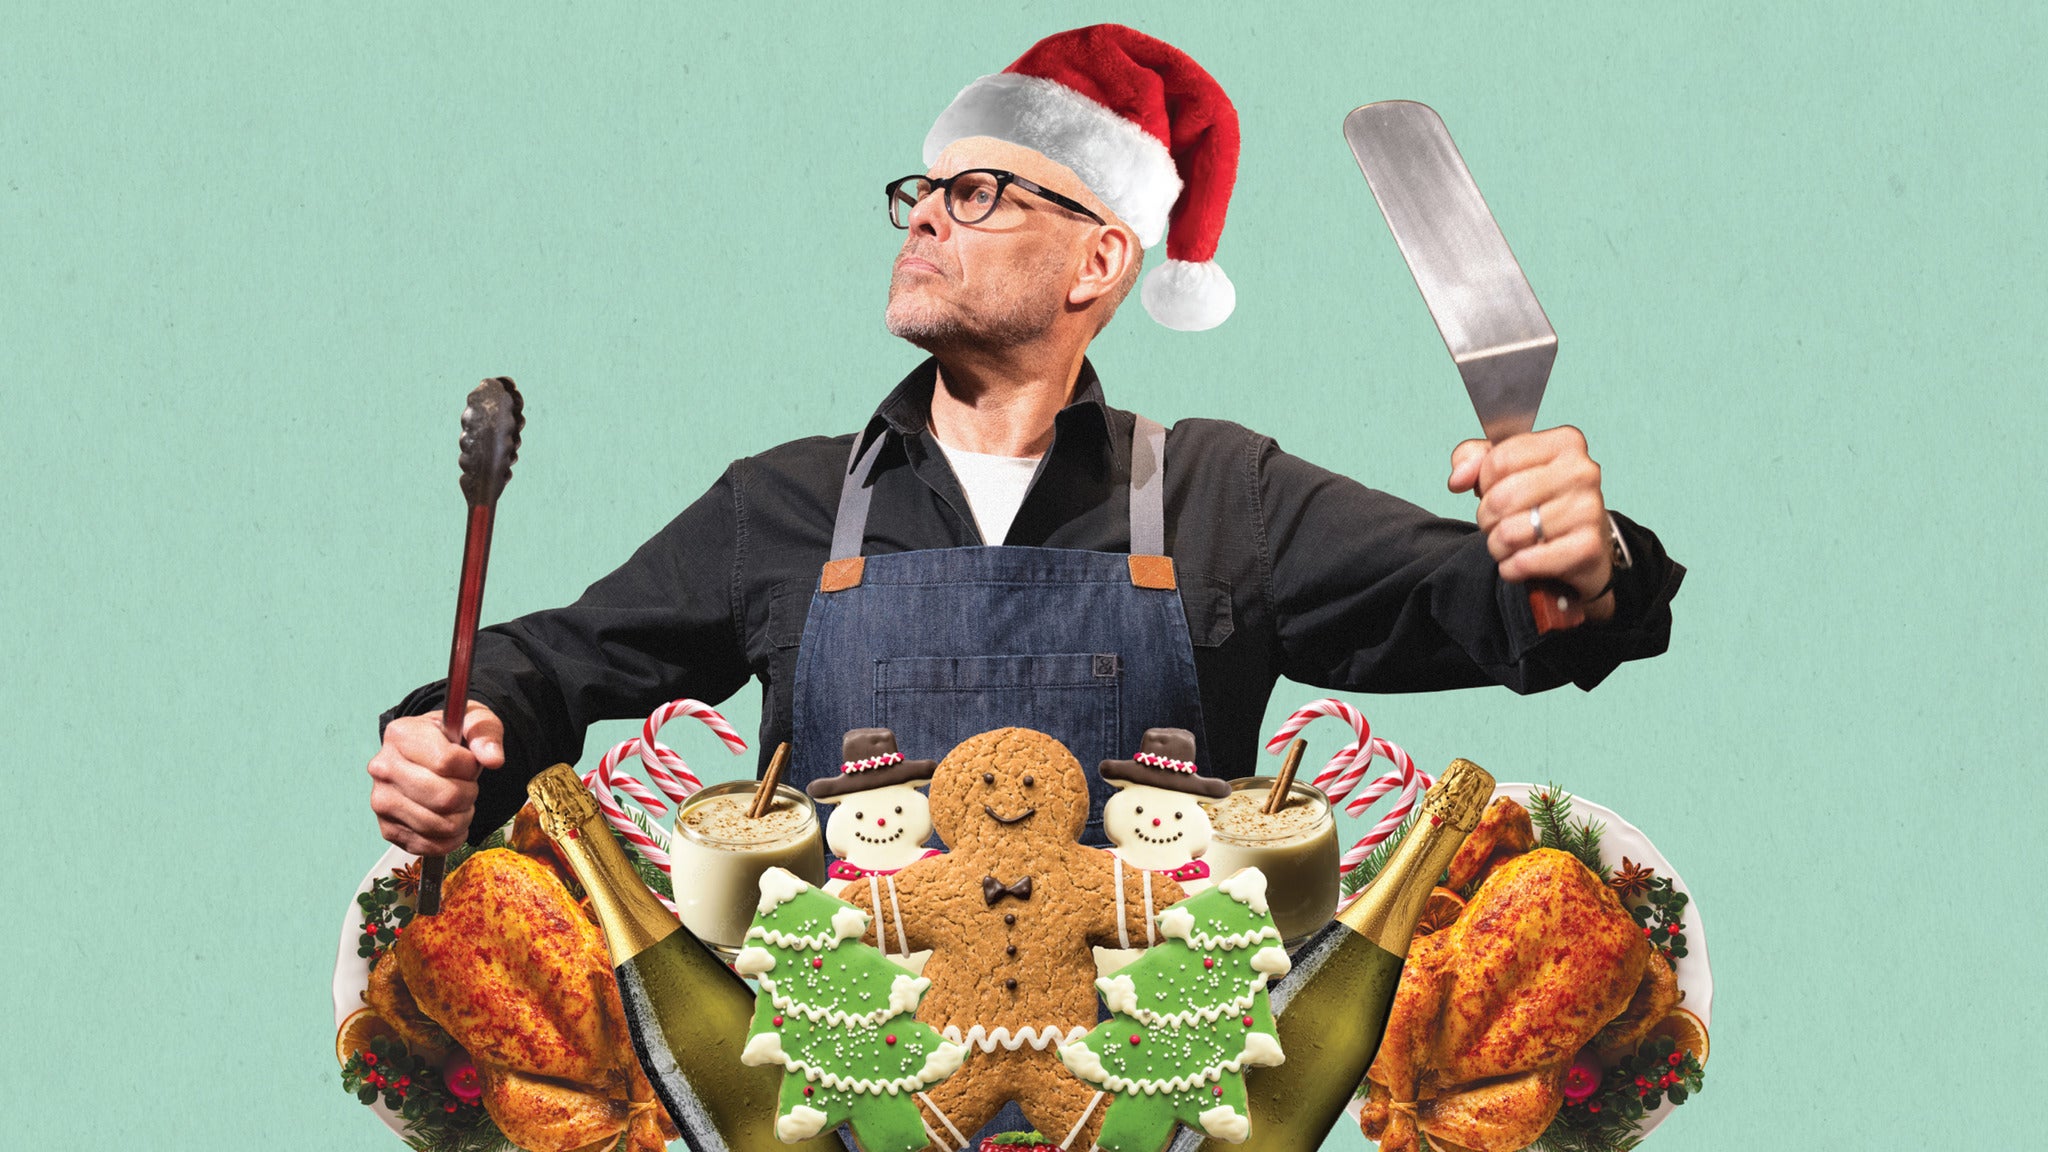 Alton Brown Live! Beyond The Eats - The Holiday Variant